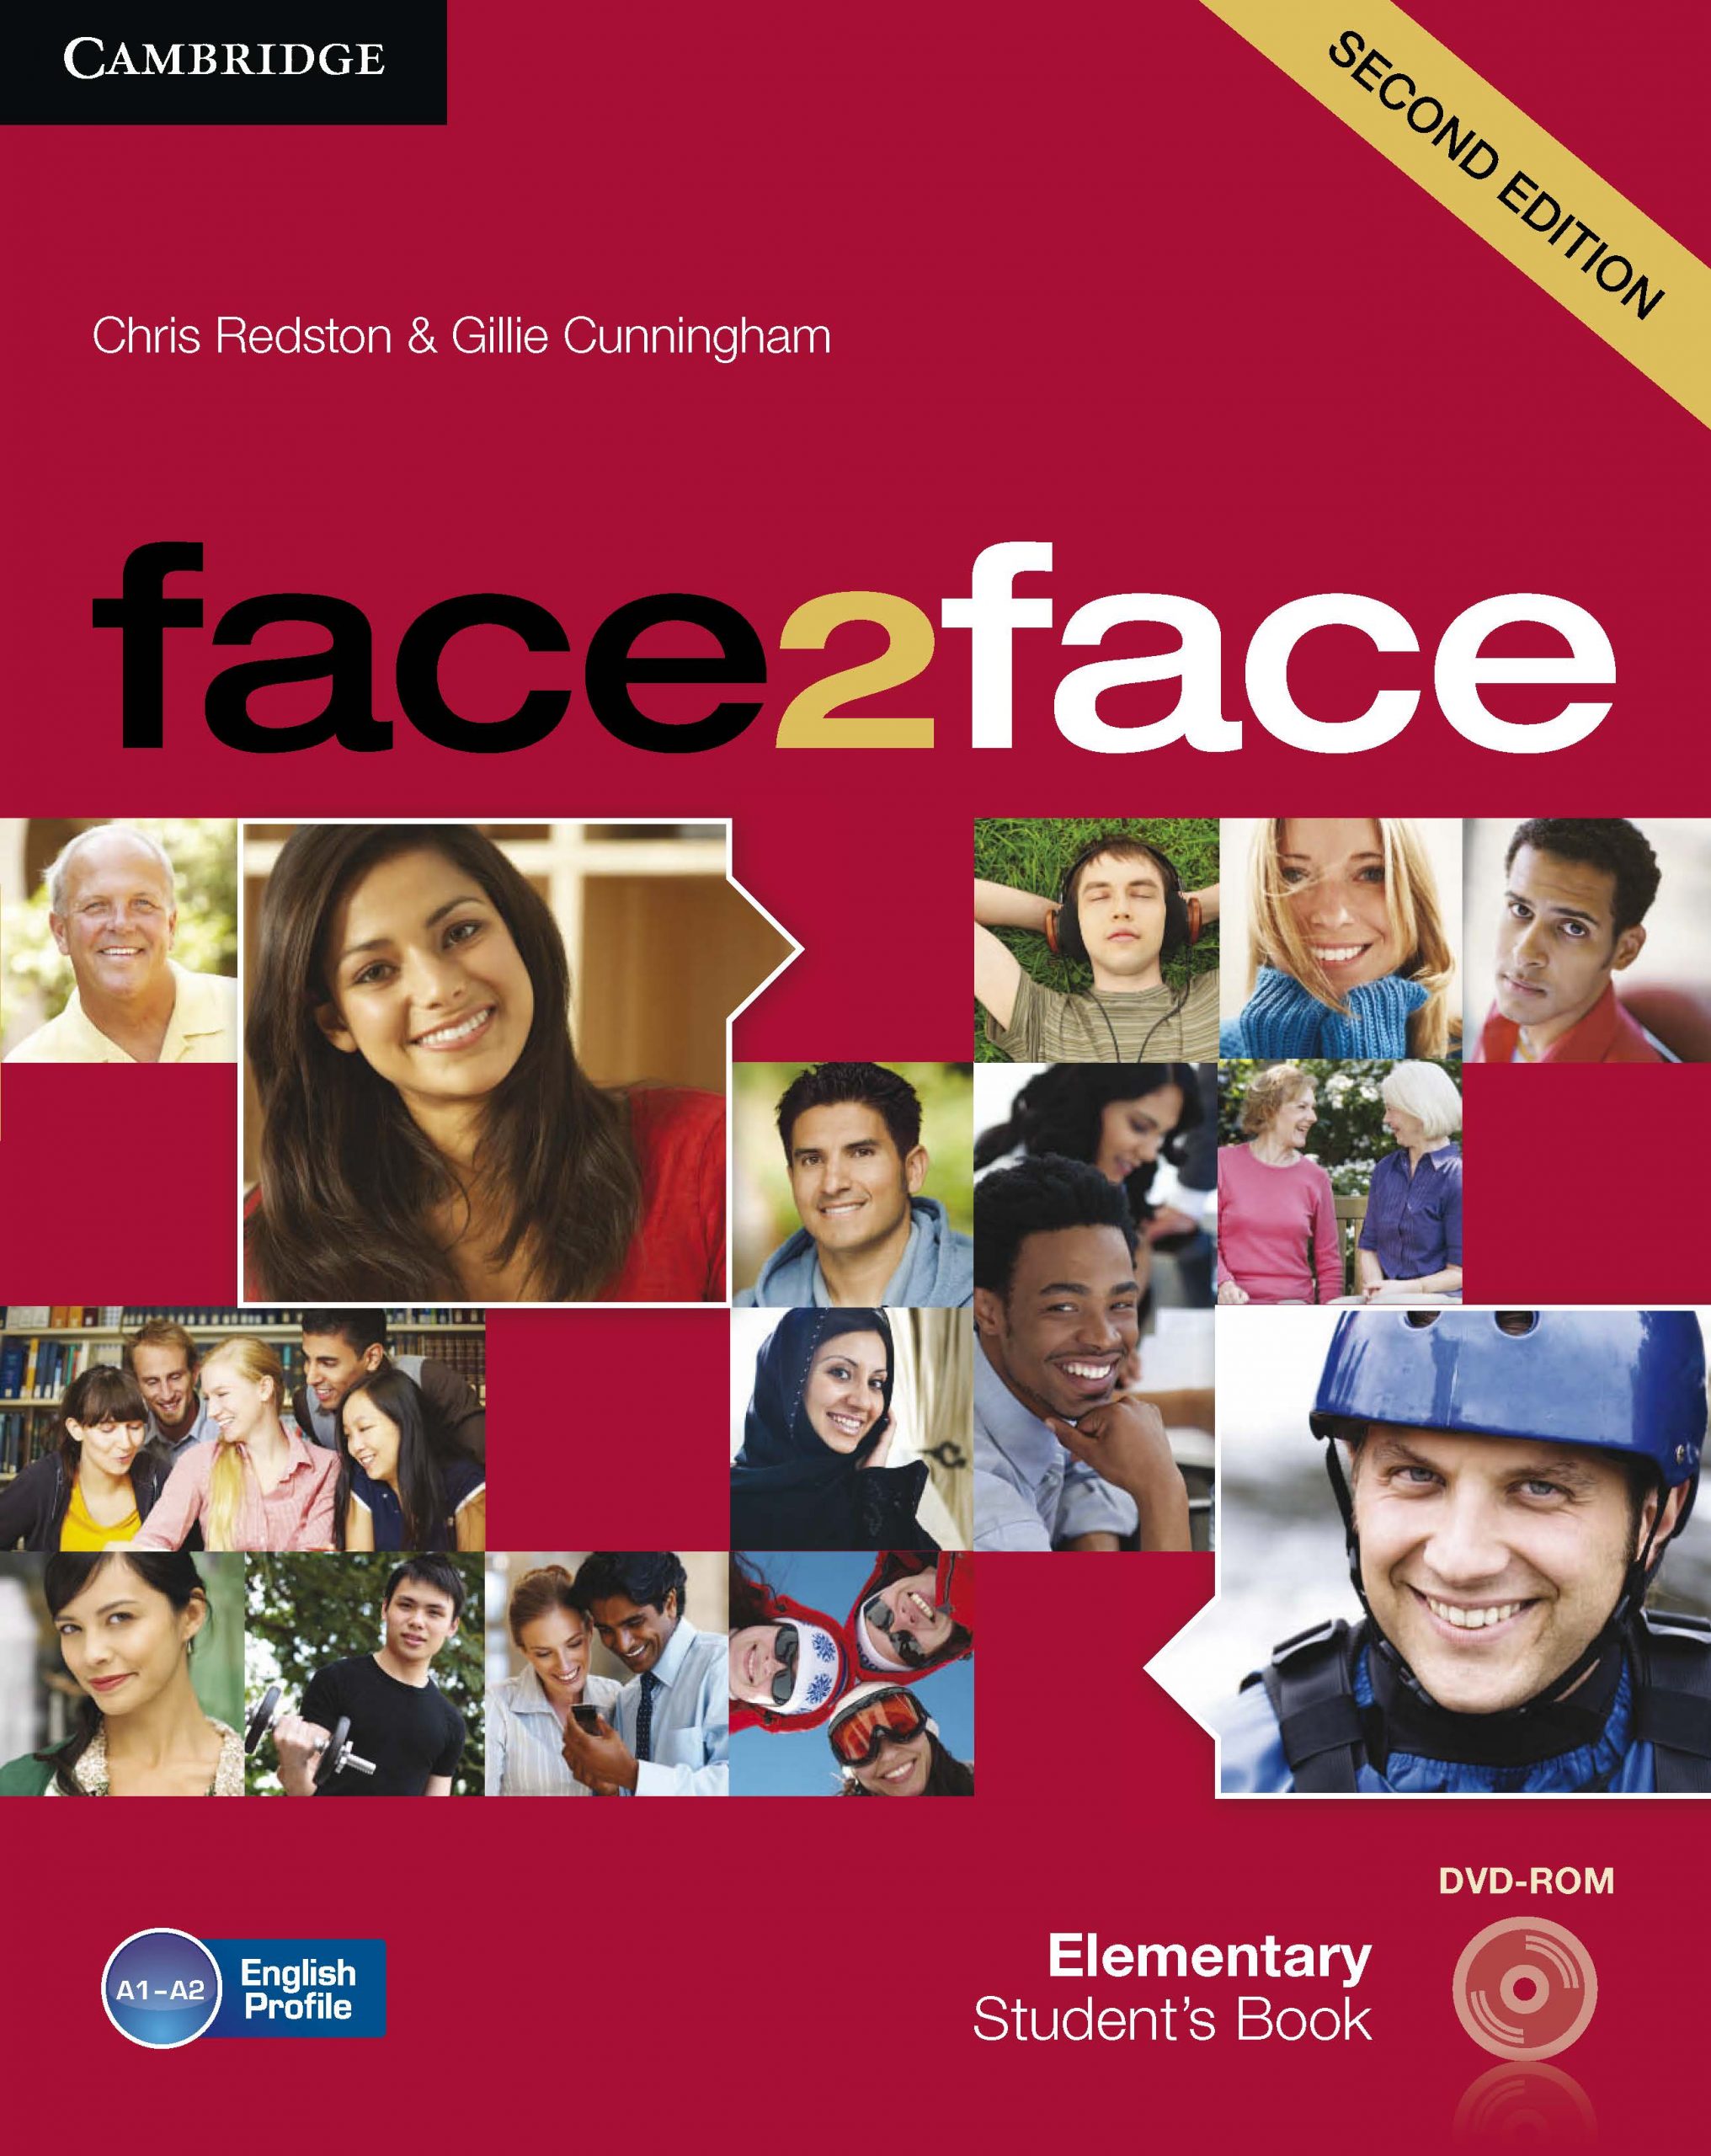 Pdf student books elementary. Face2face учебник. Учебник face2face Elementary. Face to face учебник. Face2face Elementary ютуб.